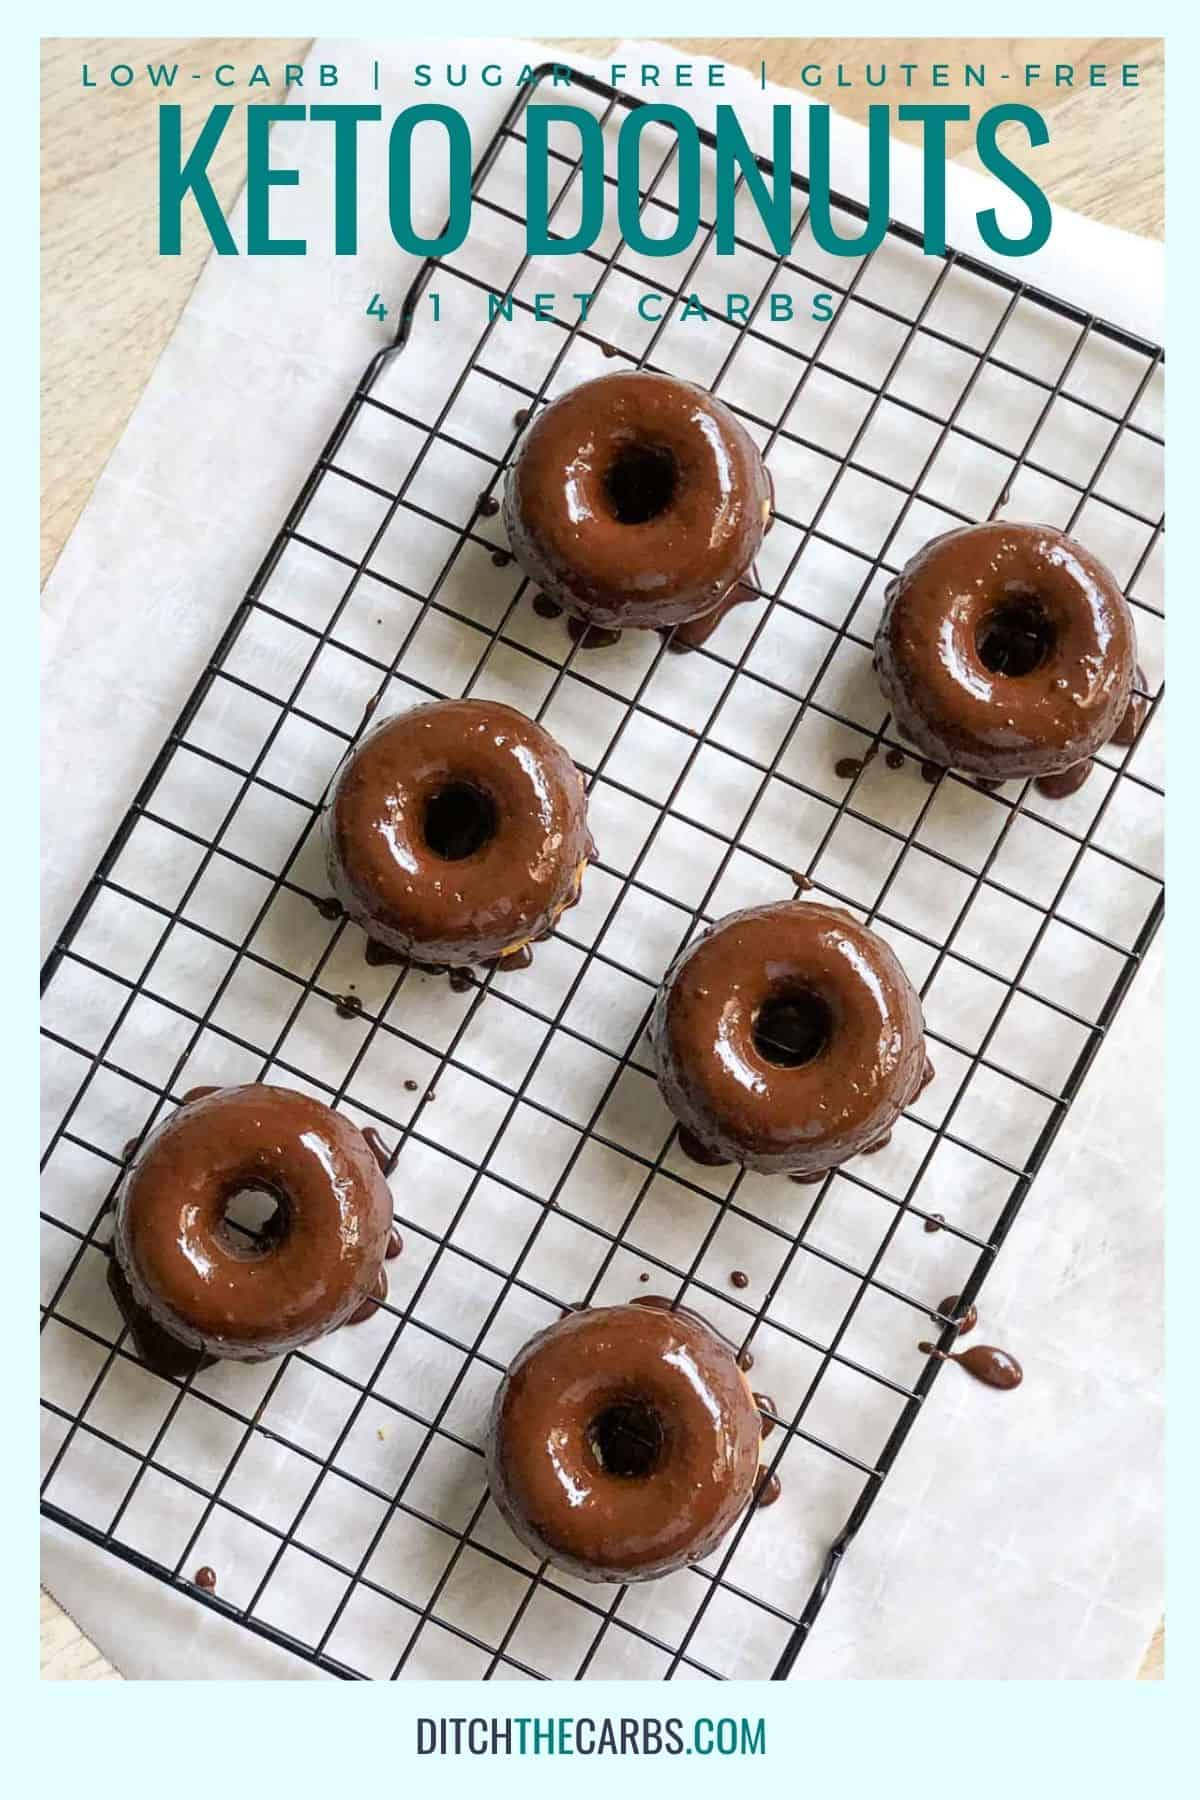 Keto donuts with chocolate icing on a wire cooling rack